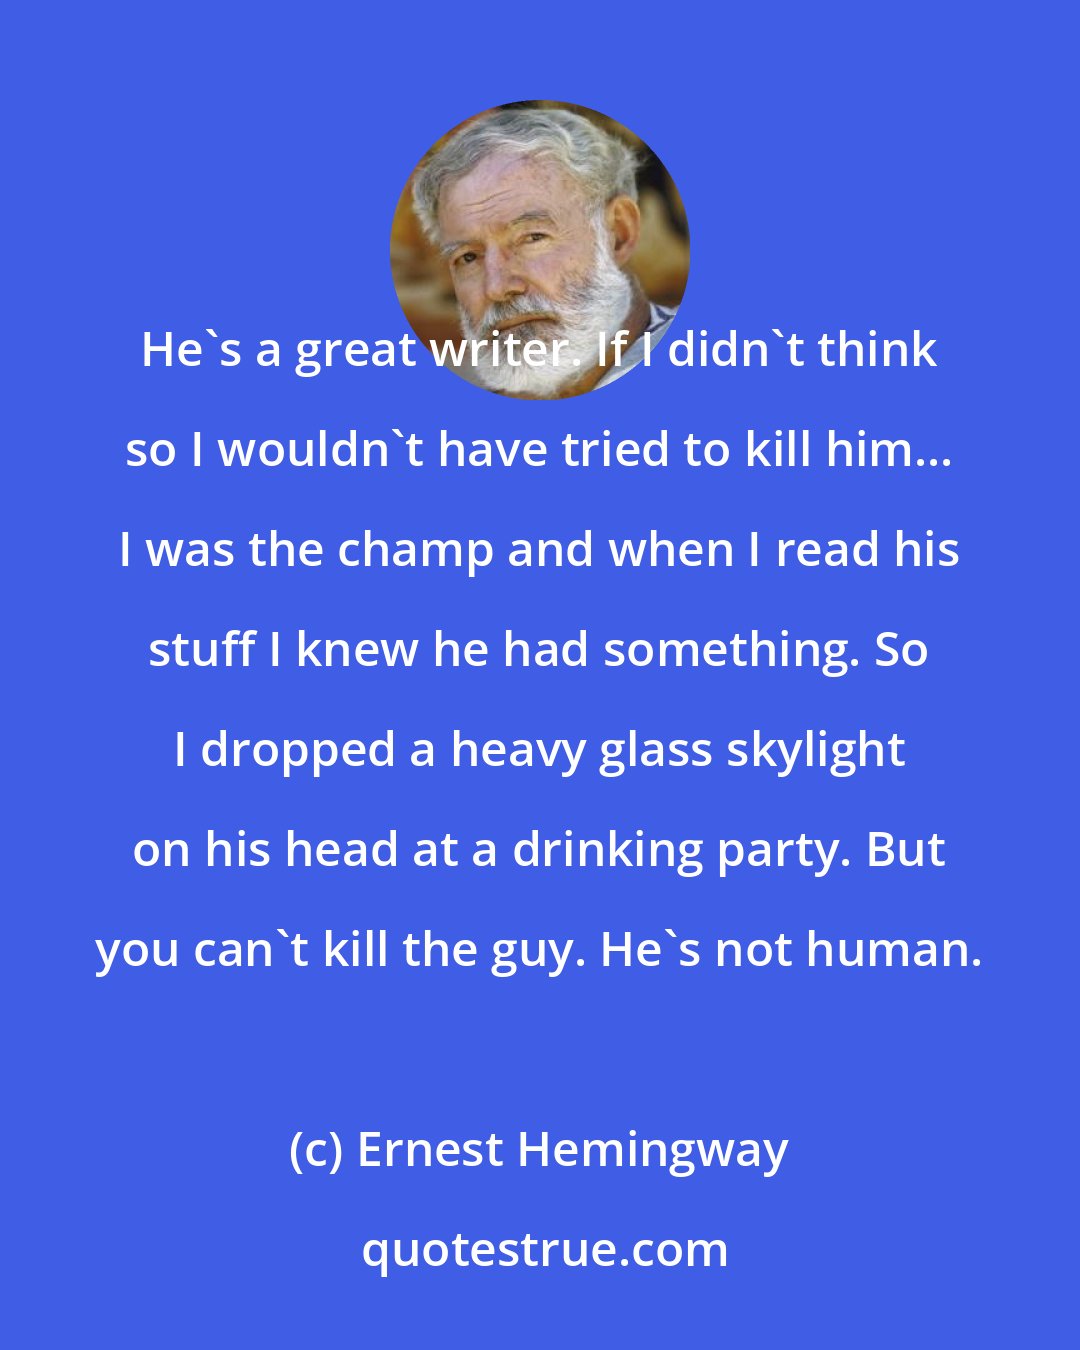 Ernest Hemingway: He's a great writer. If I didn't think so I wouldn't have tried to kill him... I was the champ and when I read his stuff I knew he had something. So I dropped a heavy glass skylight on his head at a drinking party. But you can't kill the guy. He's not human.